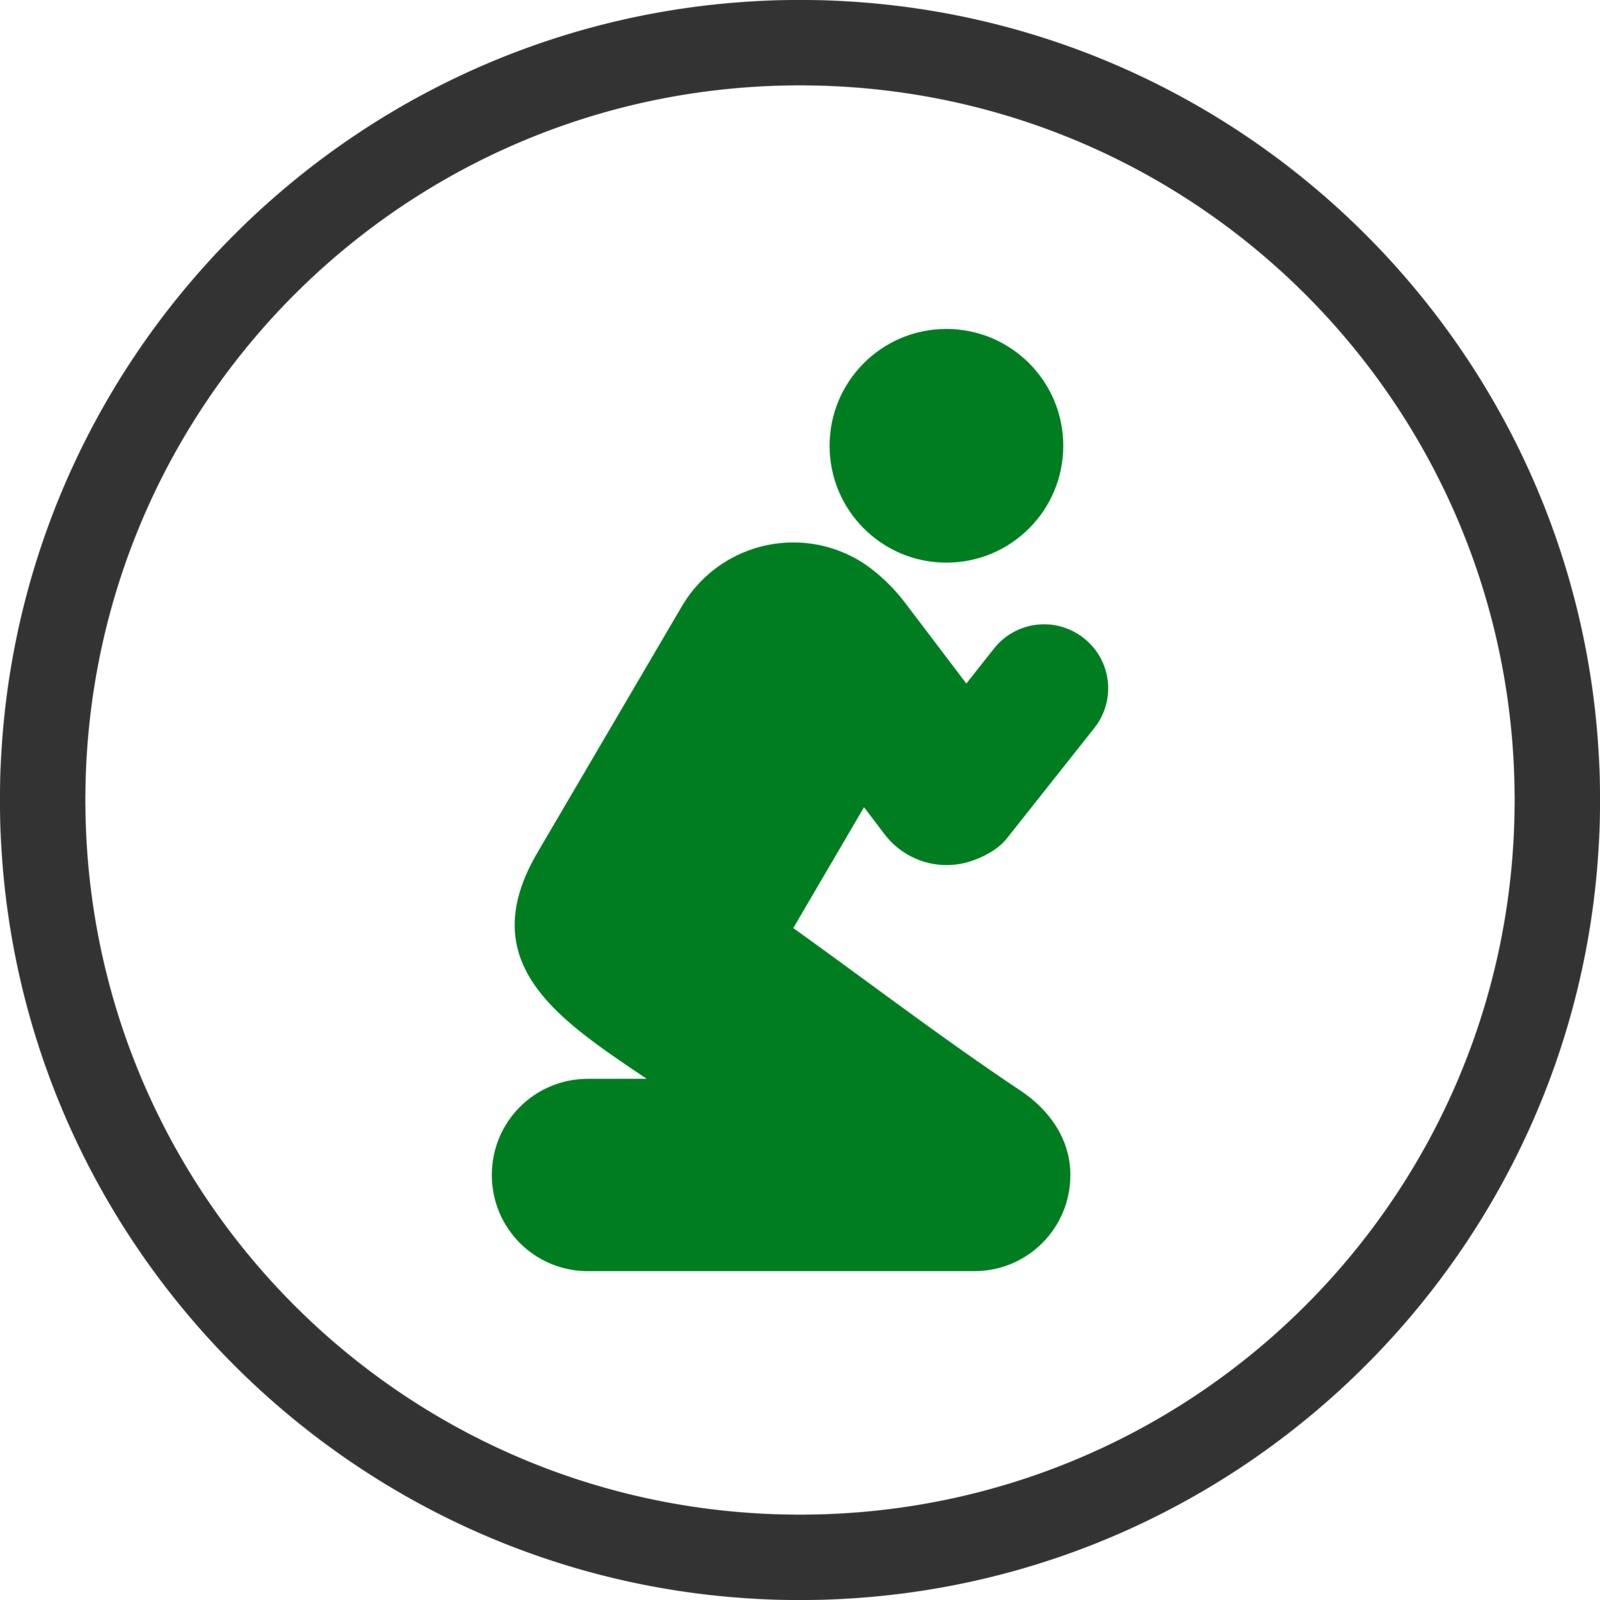 Pray vector icon. This rounded flat symbol is drawn with green and gray colors on a white background.